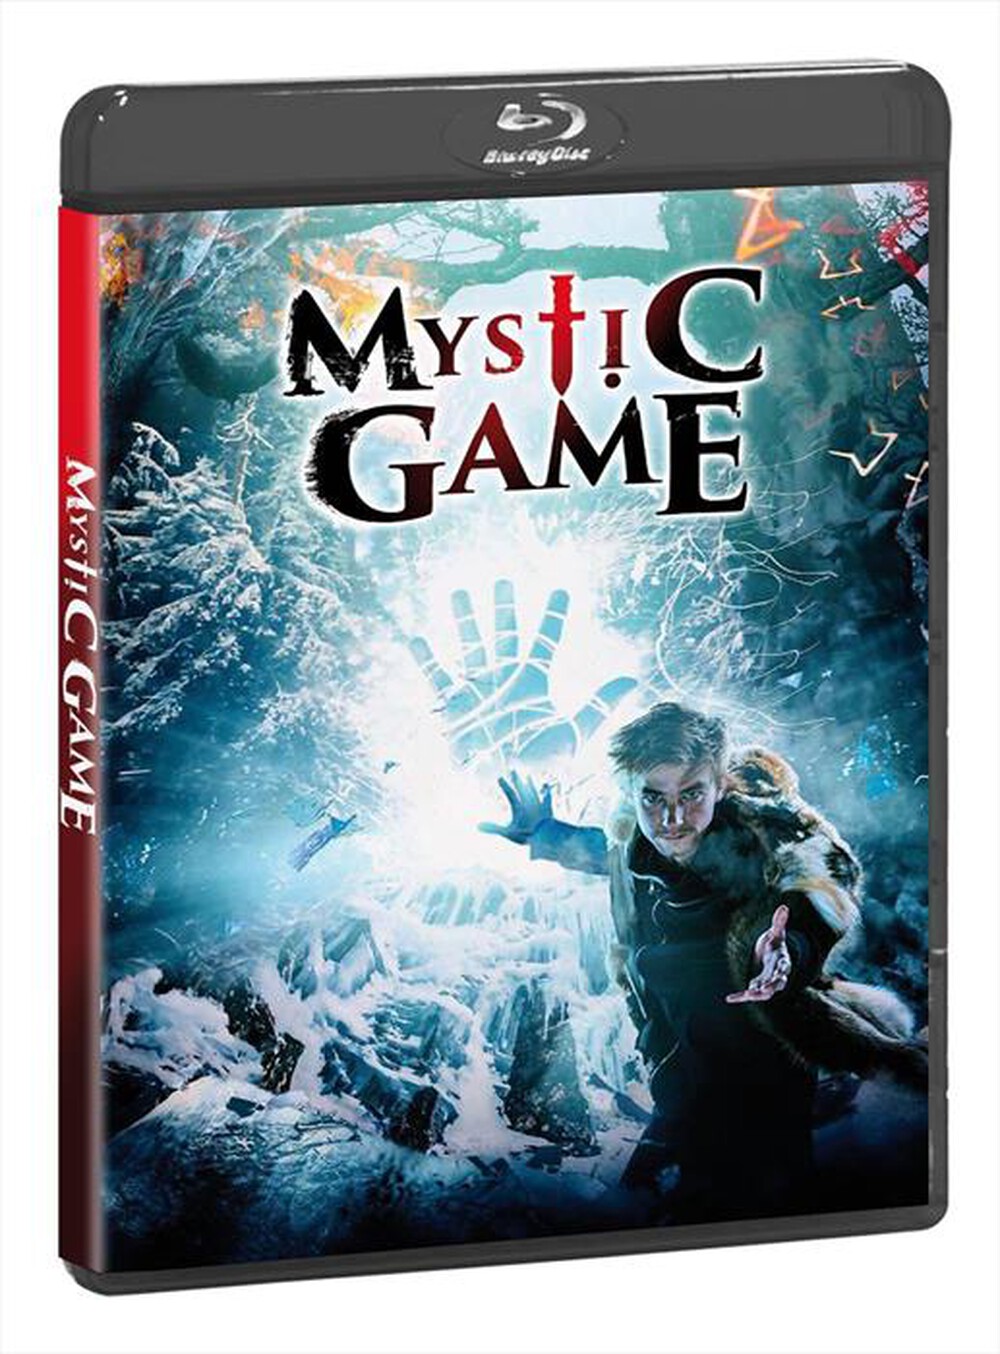 "EAGLE PICTURES - Mystic Game"